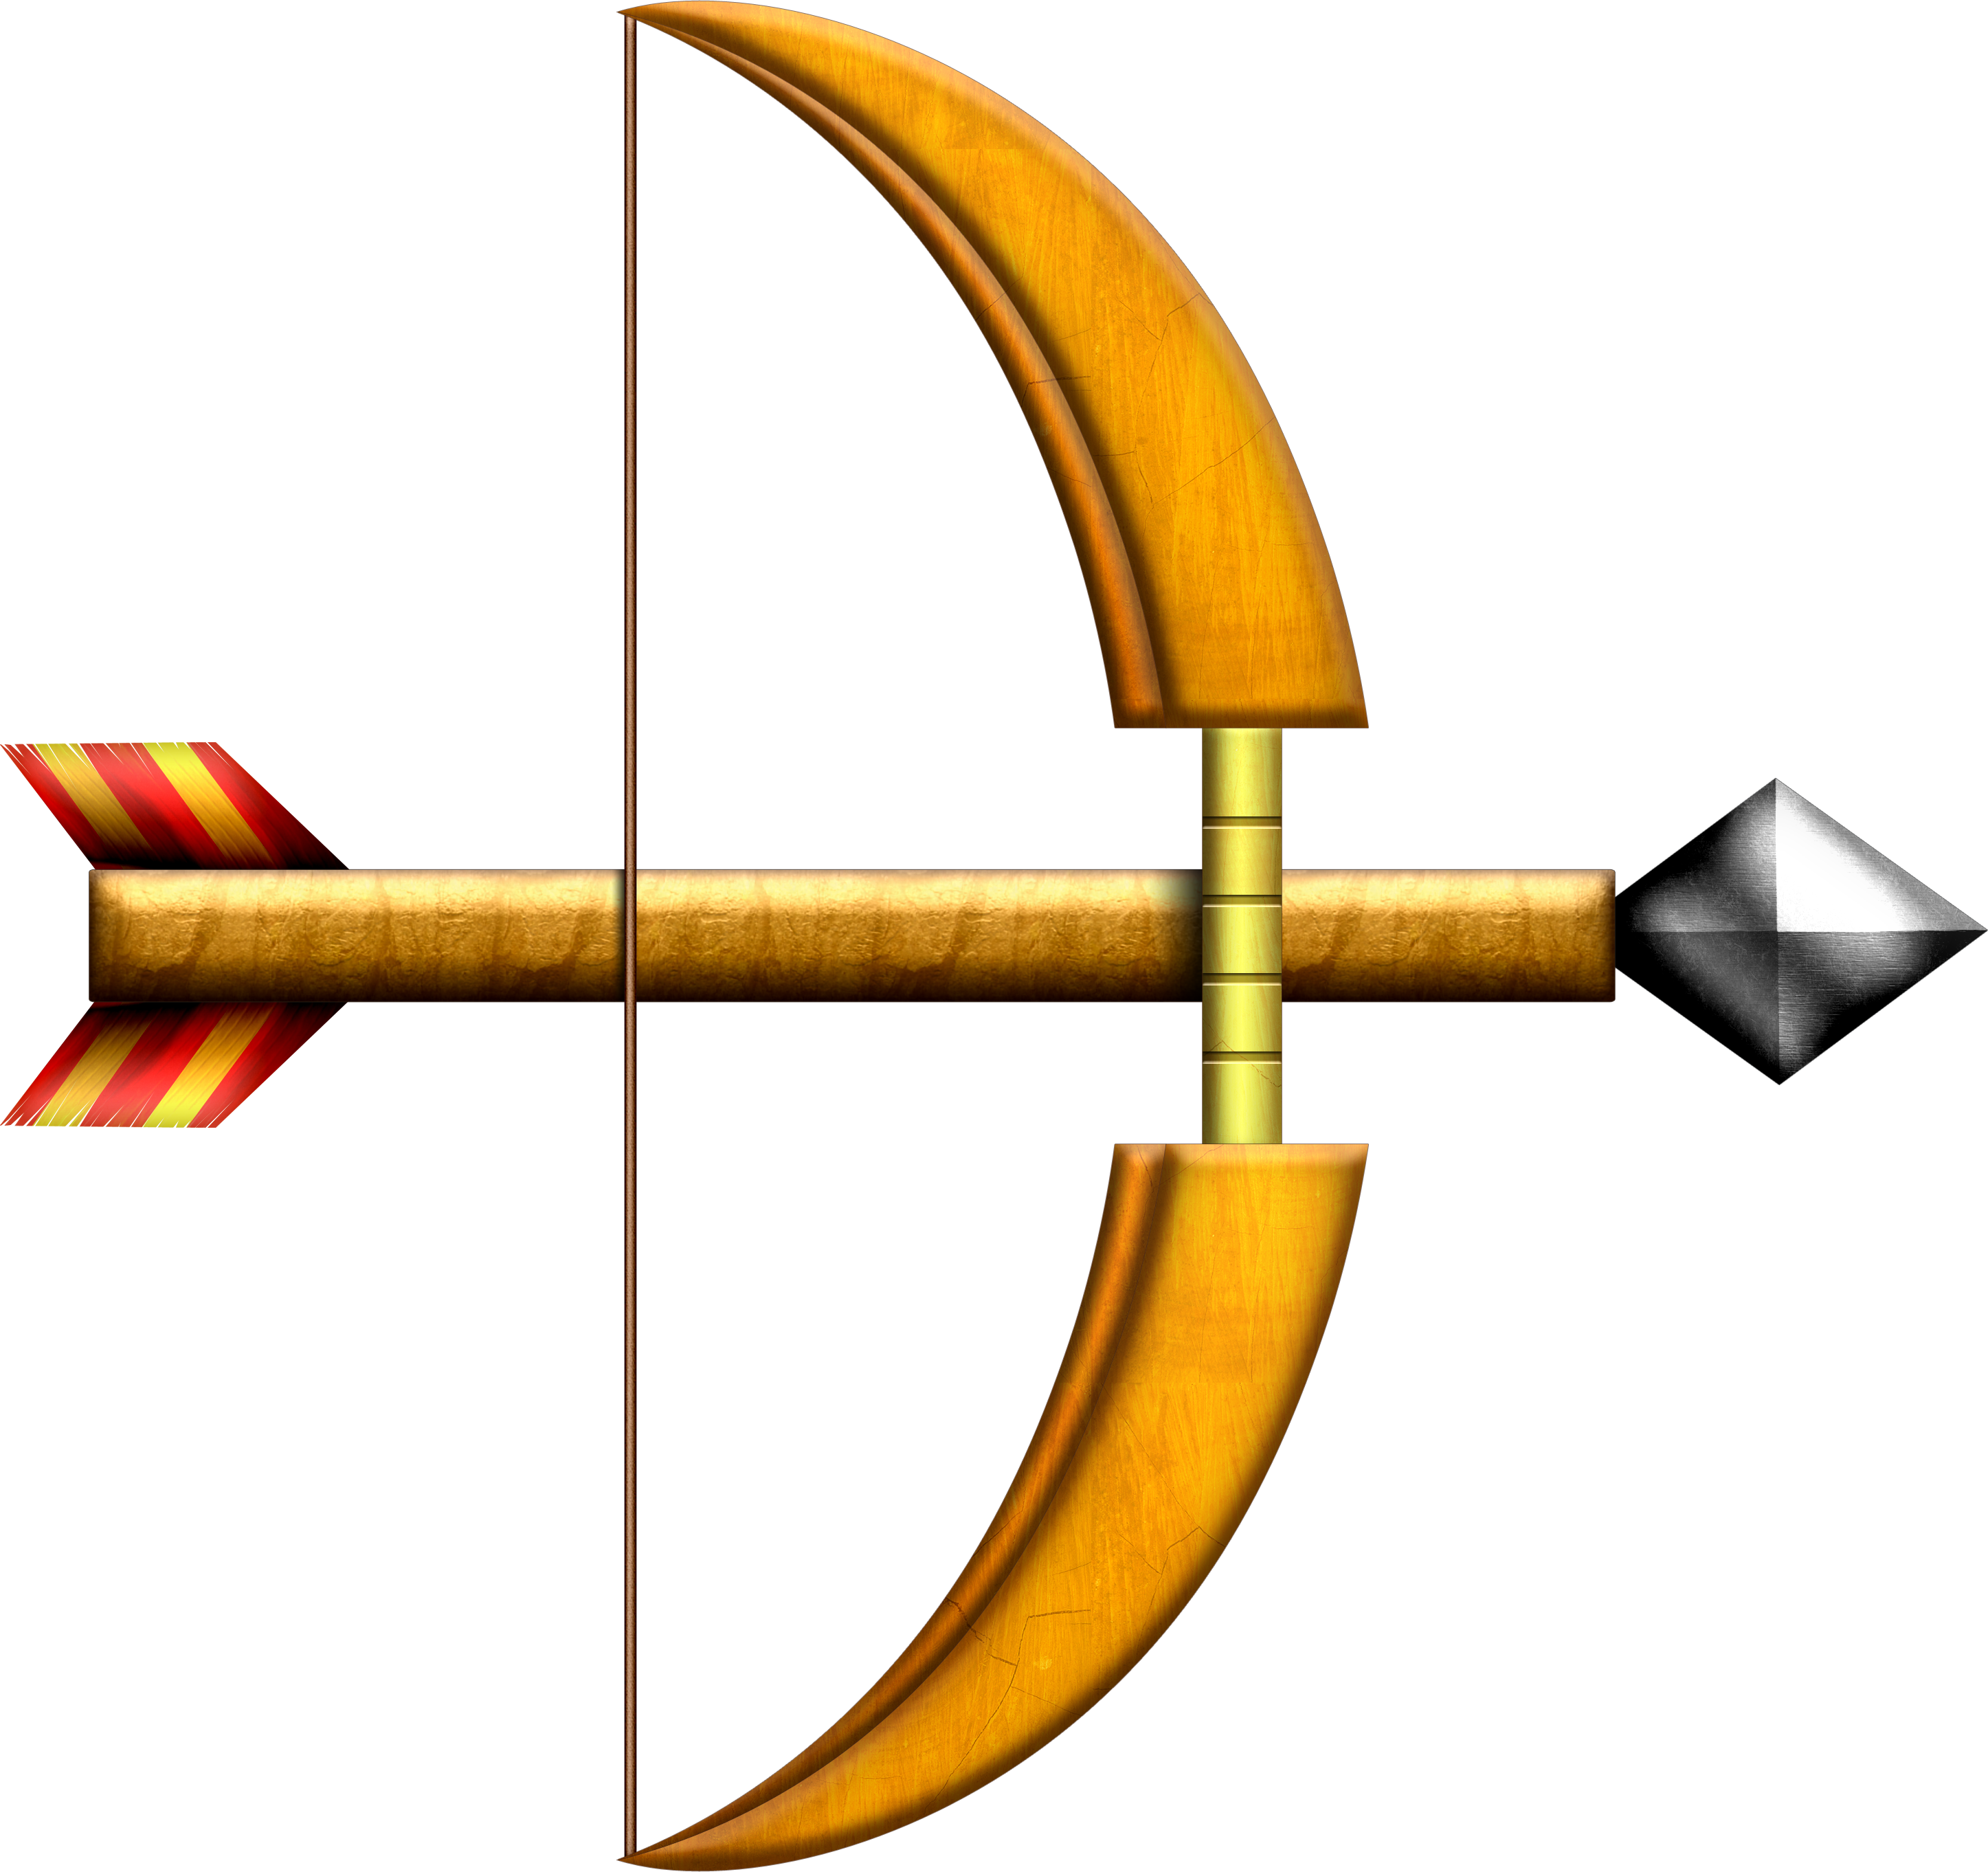 ALBW Bow and Arrow by BLUEamnesiac on Clipart library